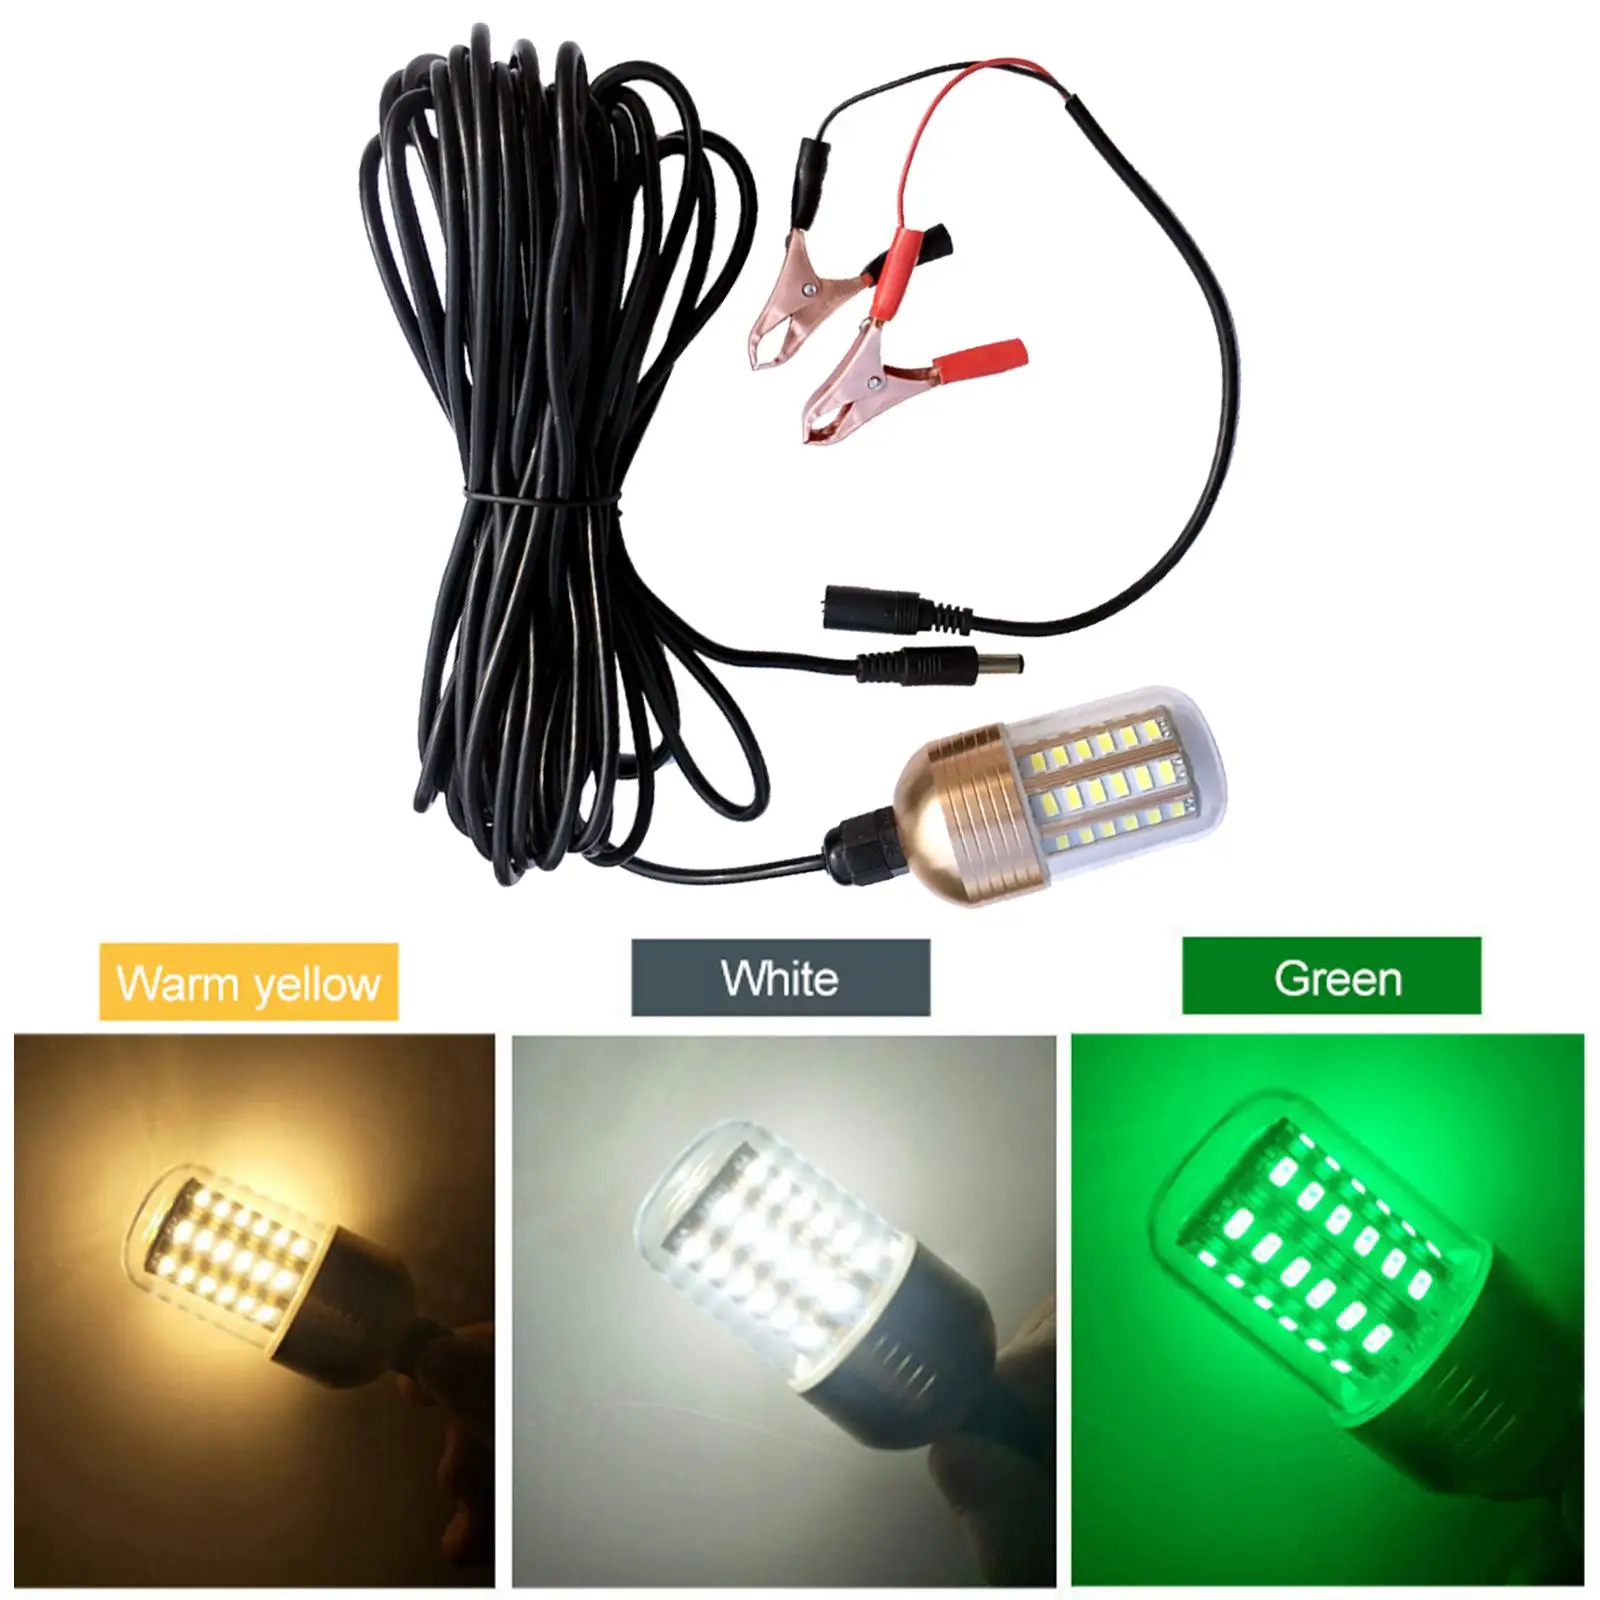 12V 60 LED Submersible Underwater Light, Lure Bait Finder, Night Fishing Finder Lamp for Outdoor Fishing